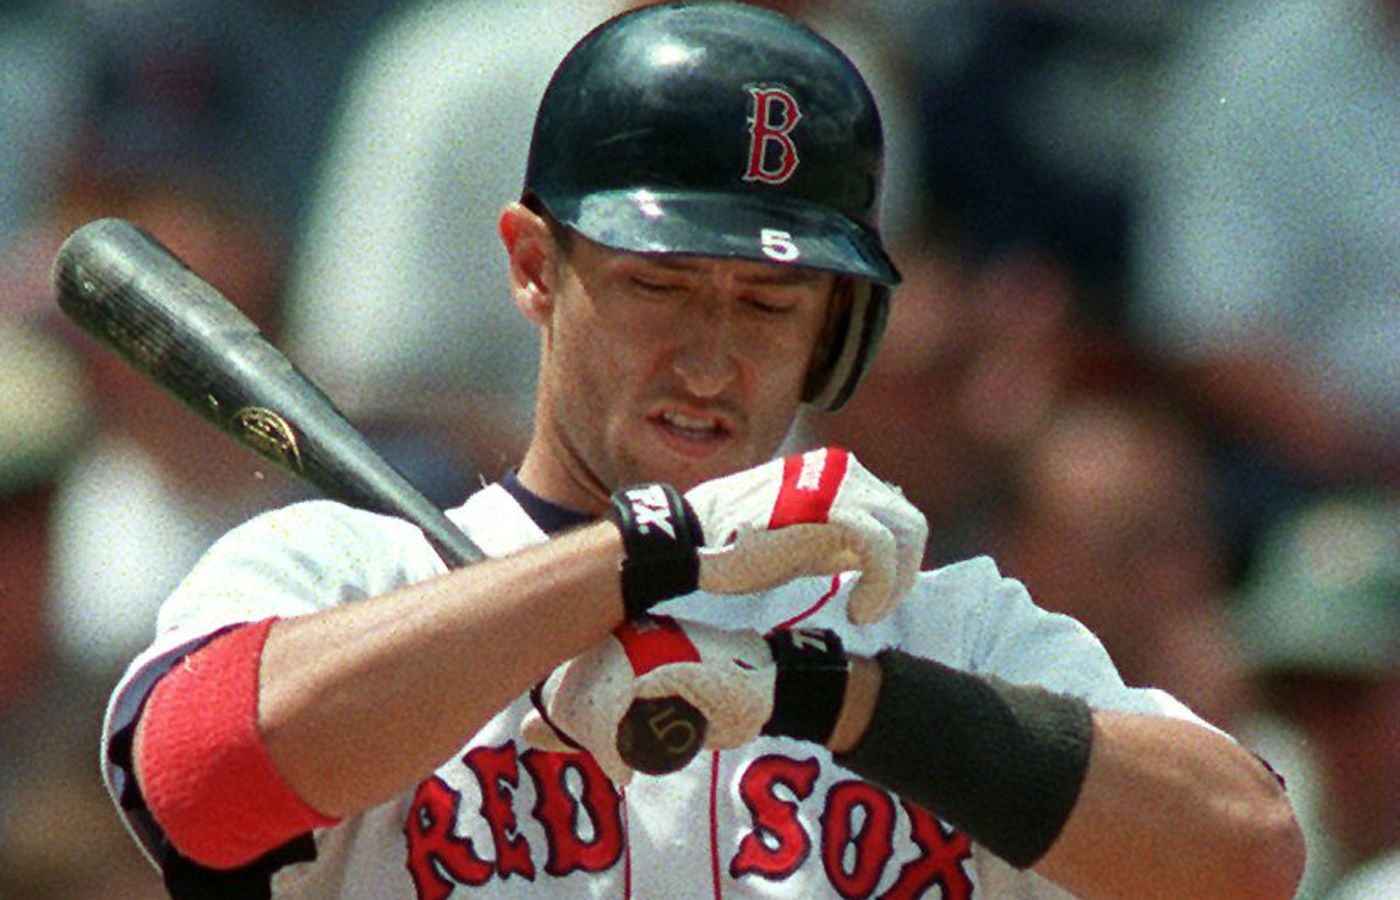 No matter what's in the cards, here's why Nomar tops Jeter - The